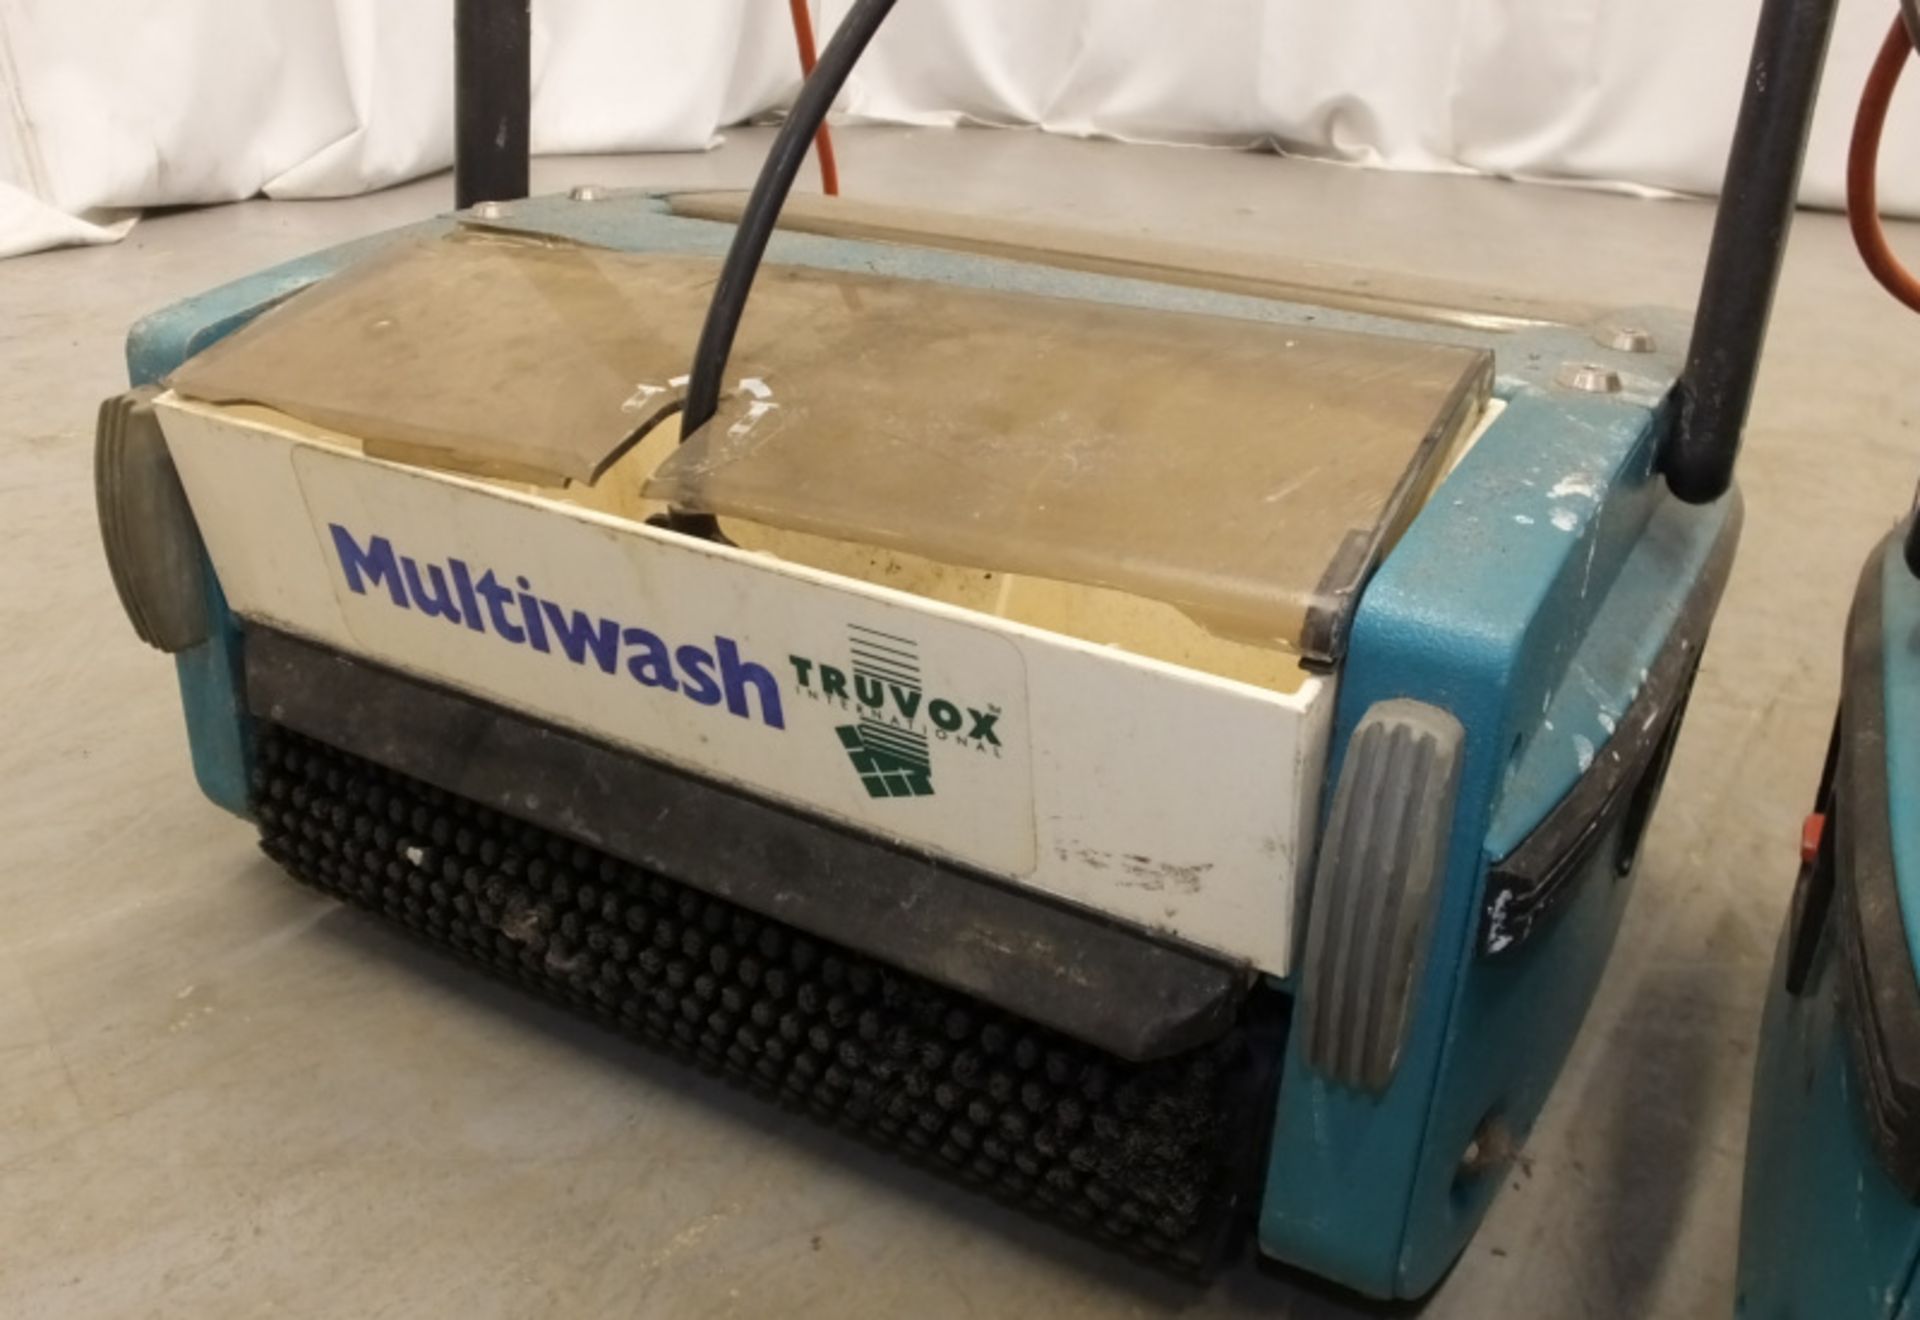 2 x Truvox Multiwash MW340 Scrubber Dryers - damage to both units as seen in pictures - Image 3 of 5